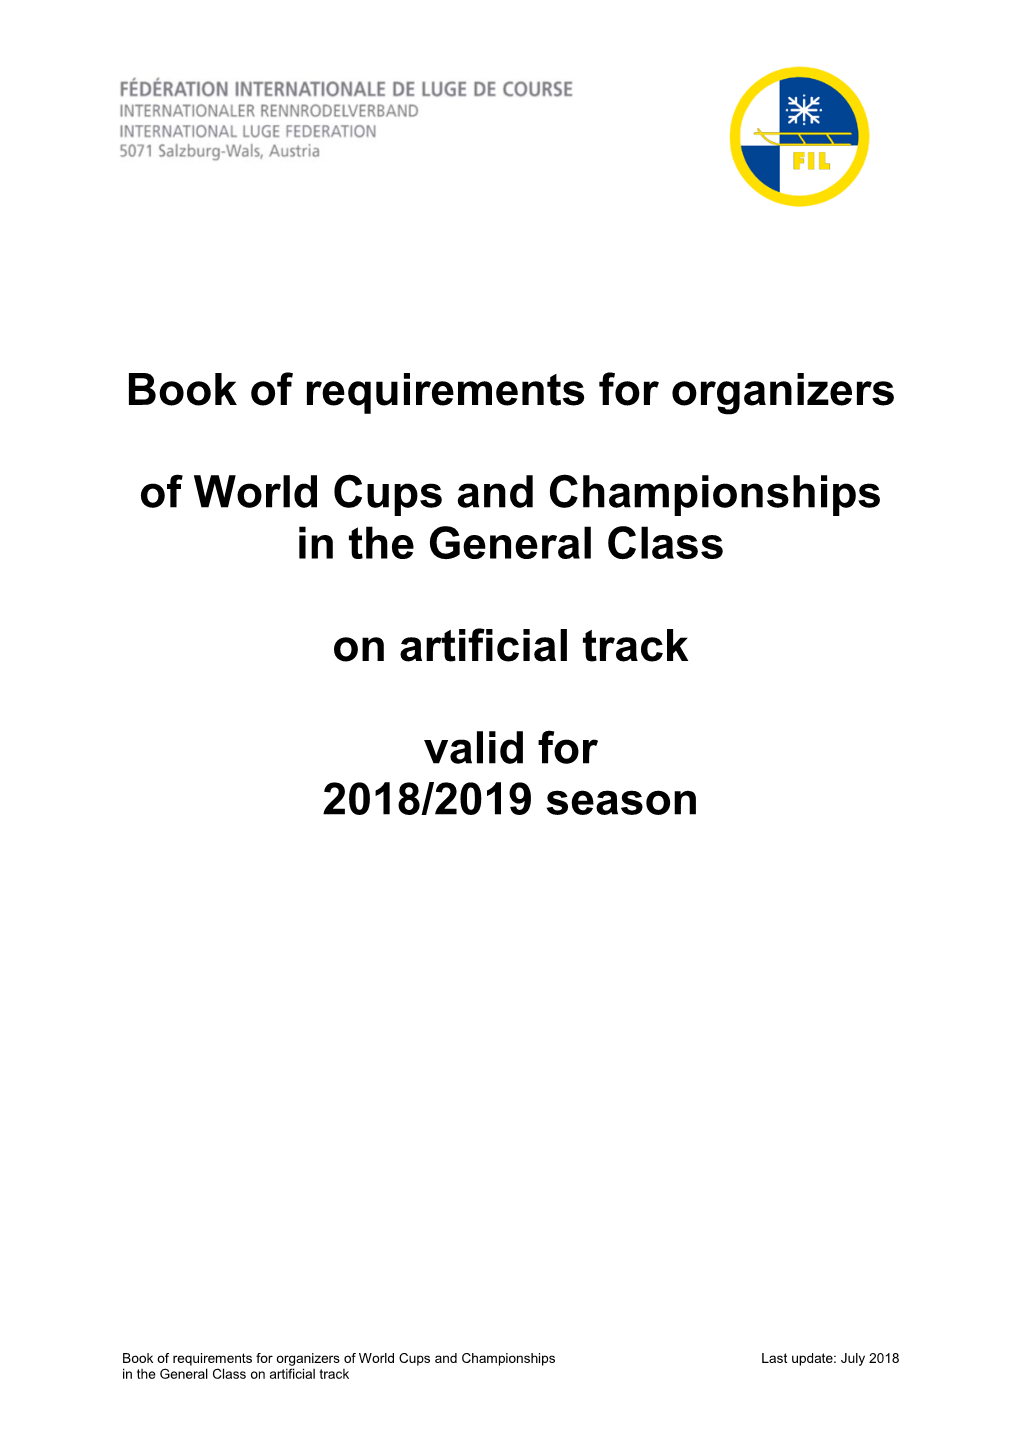 Book of Requirements for Organizers of World Cups and Championships In